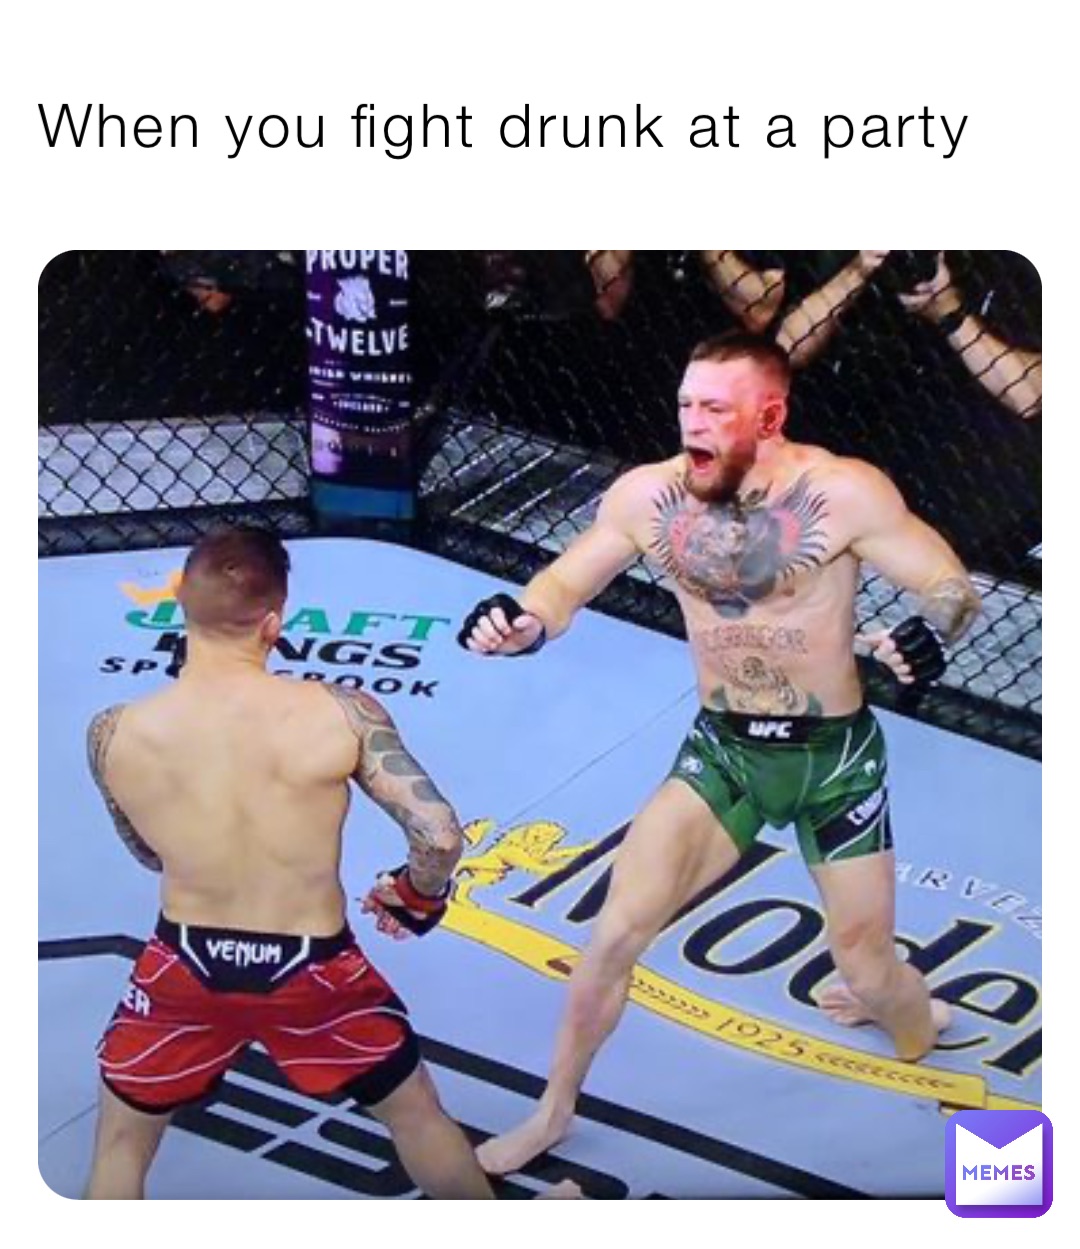 When you fight drunk at a party